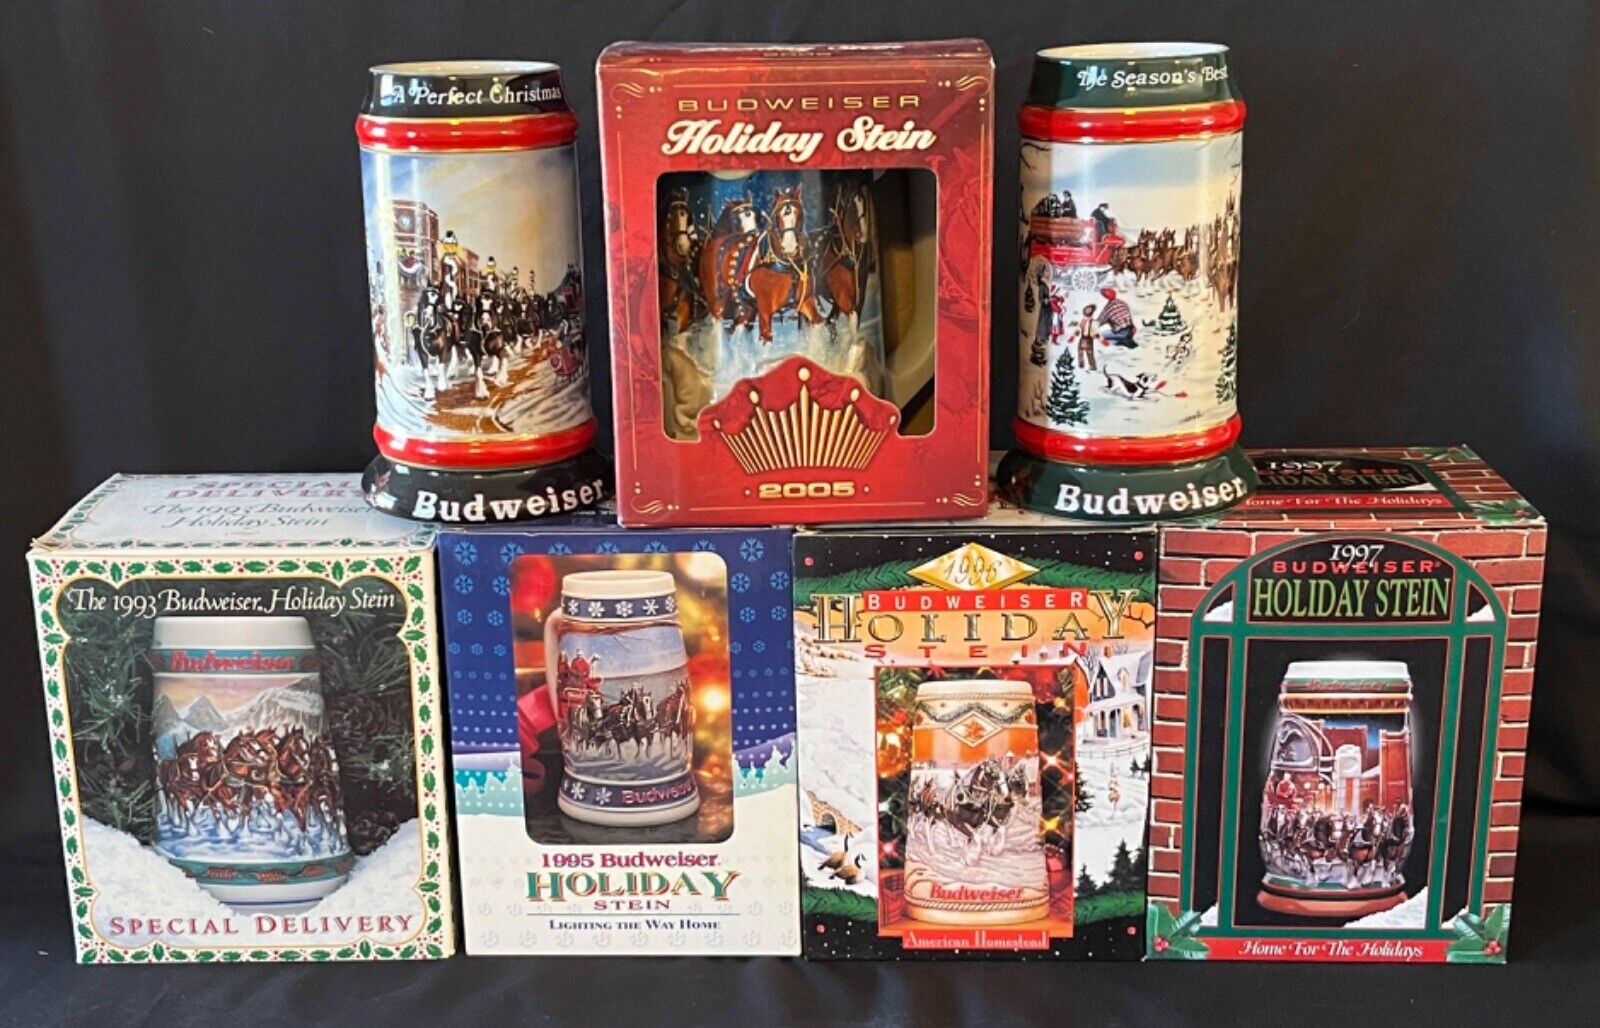 Budweiser Holiday Christmas Steins 7 Total 1991,1992,1993,1995,1996,1997,2005